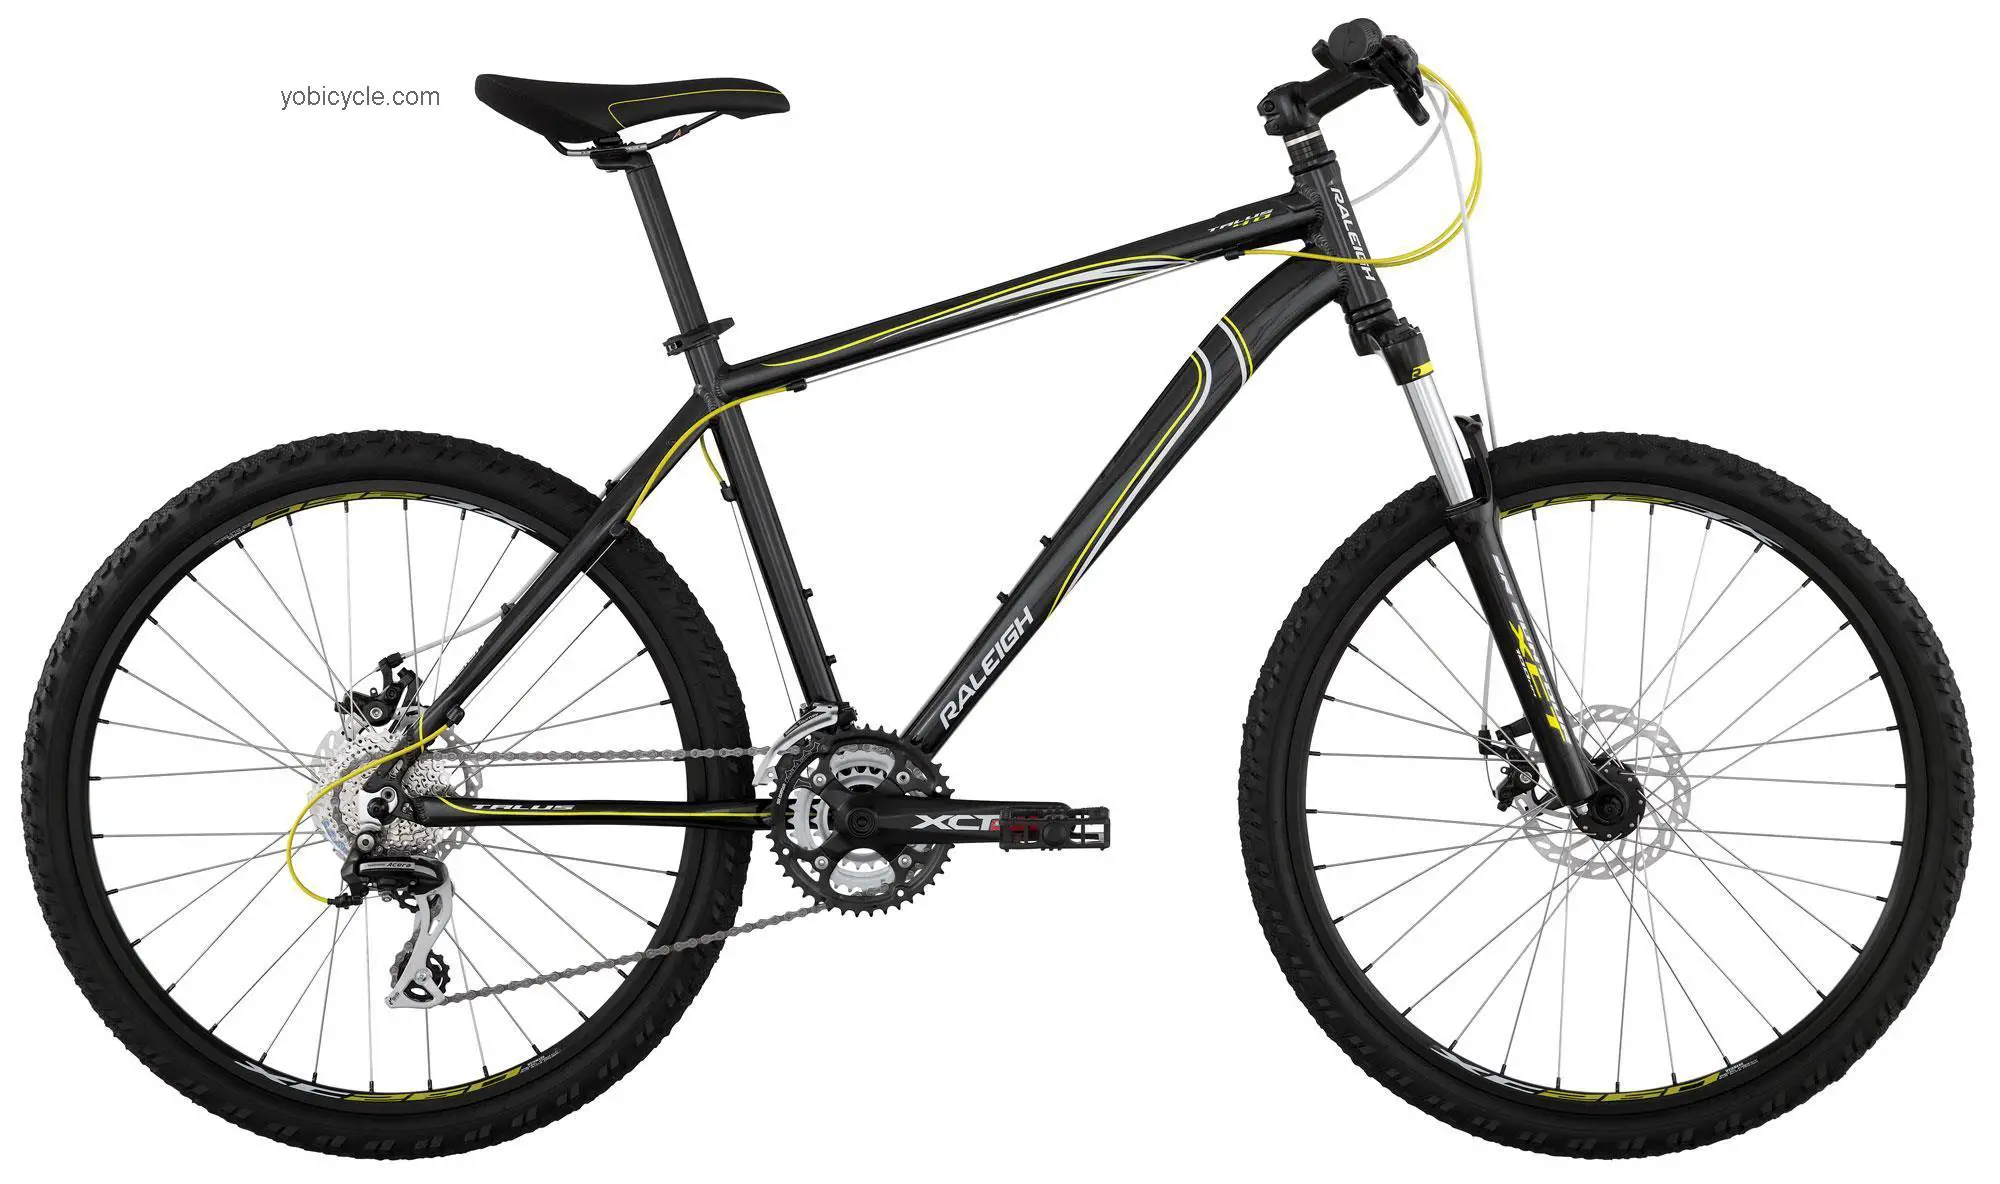 Raleigh Talus 4.0 2012 comparison online with competitors